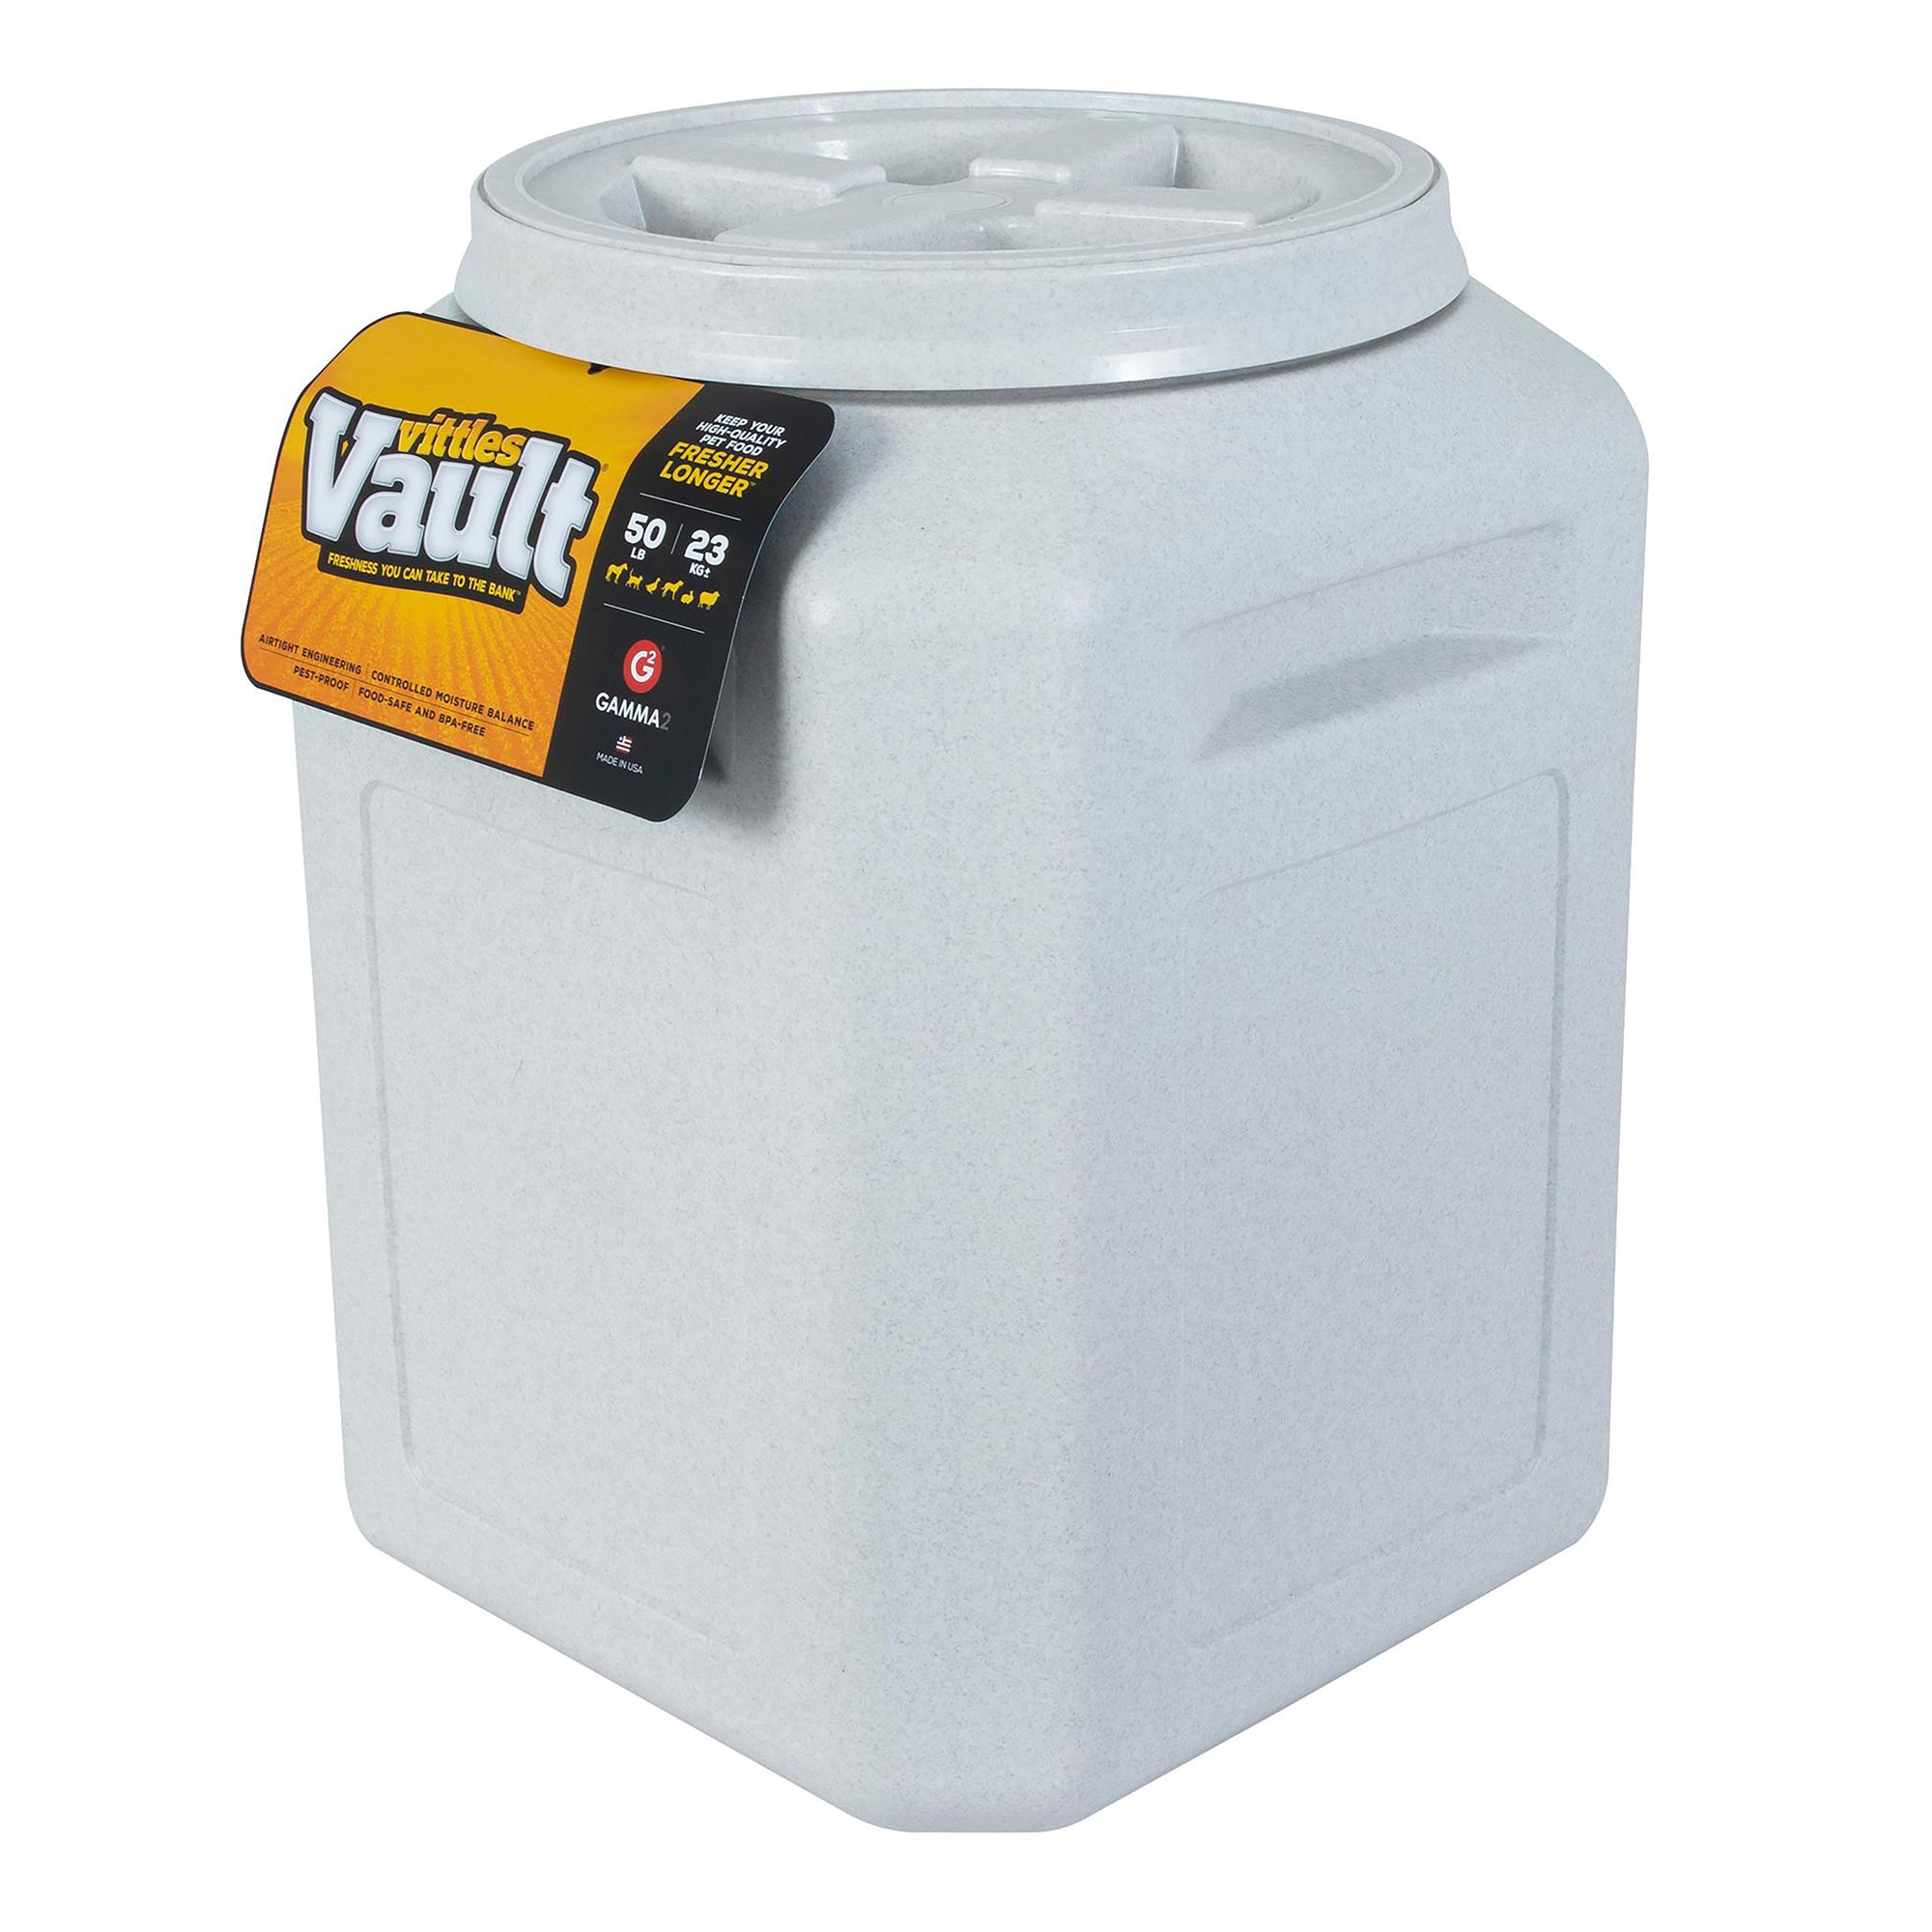 Vittles Vault® by GAMMA2 Outback Pet Food Container